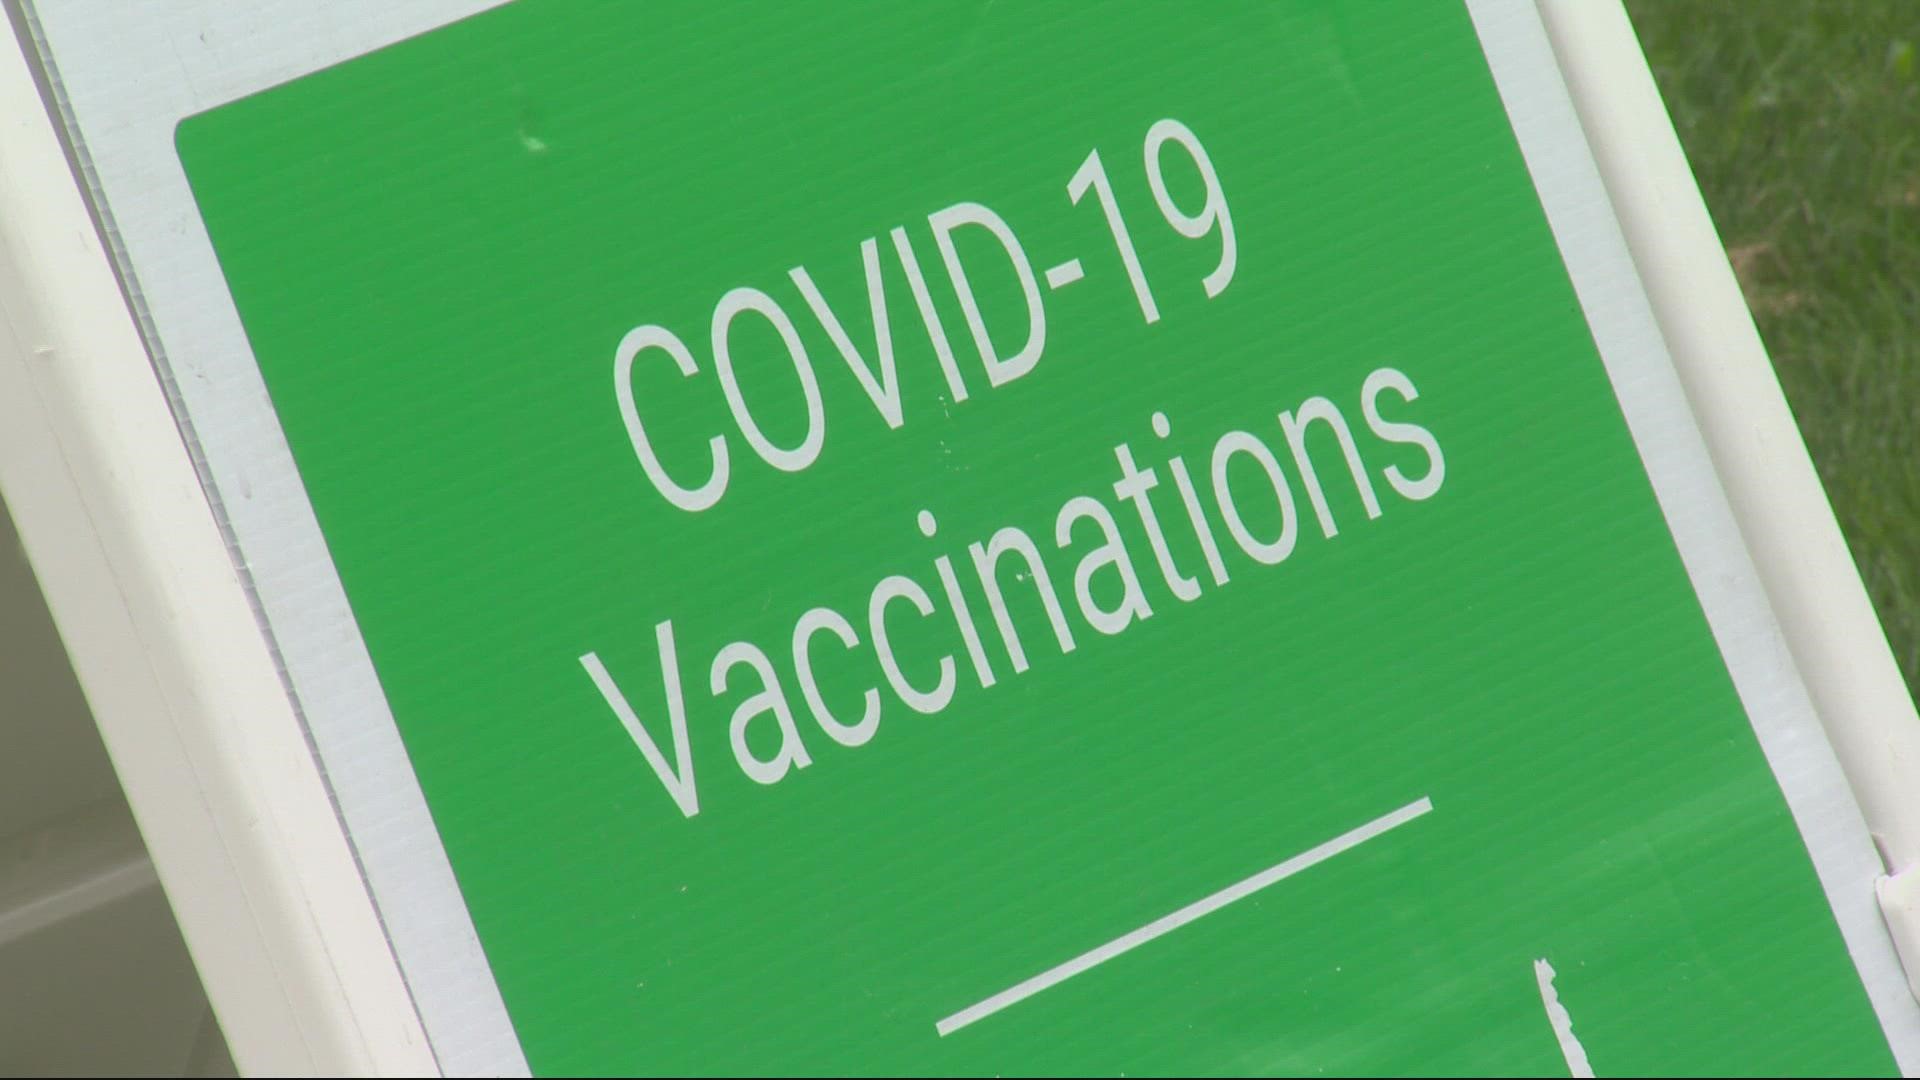 On Aug. 20, Portland Public Schools opened vaccine clinics to get students and staff vaccinated against COVID-19 before school starts. Christelle Koumoue reports.